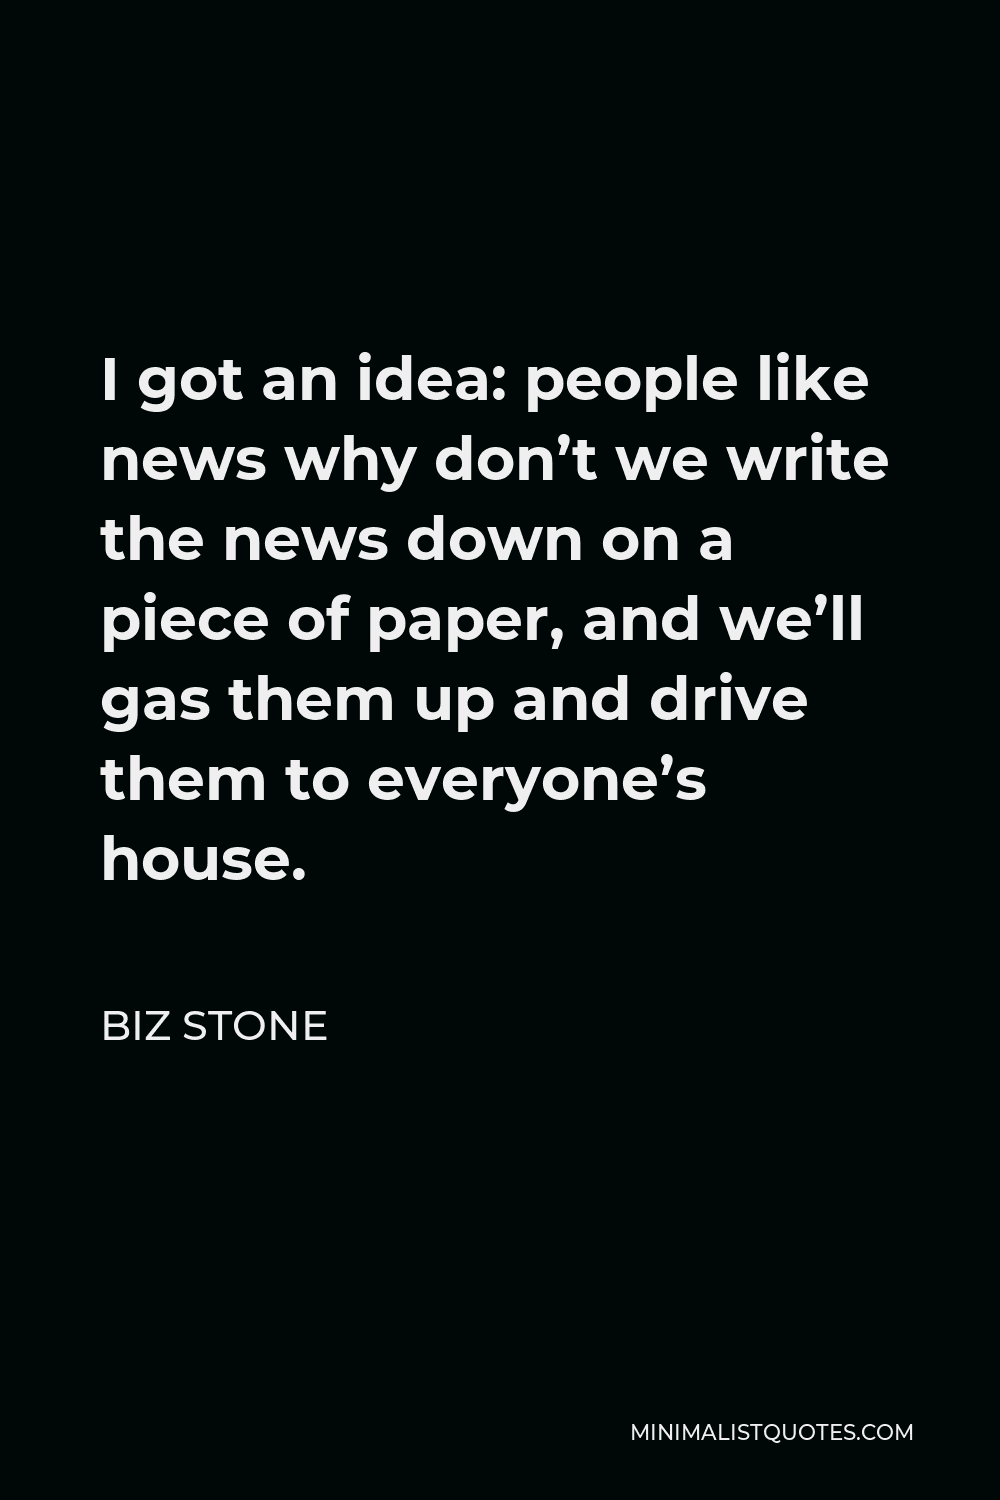 Biz Stone Quote - I got an idea: people like news why don’t we write the news down on a piece of paper, and we’ll gas them up and drive them to everyone’s house.